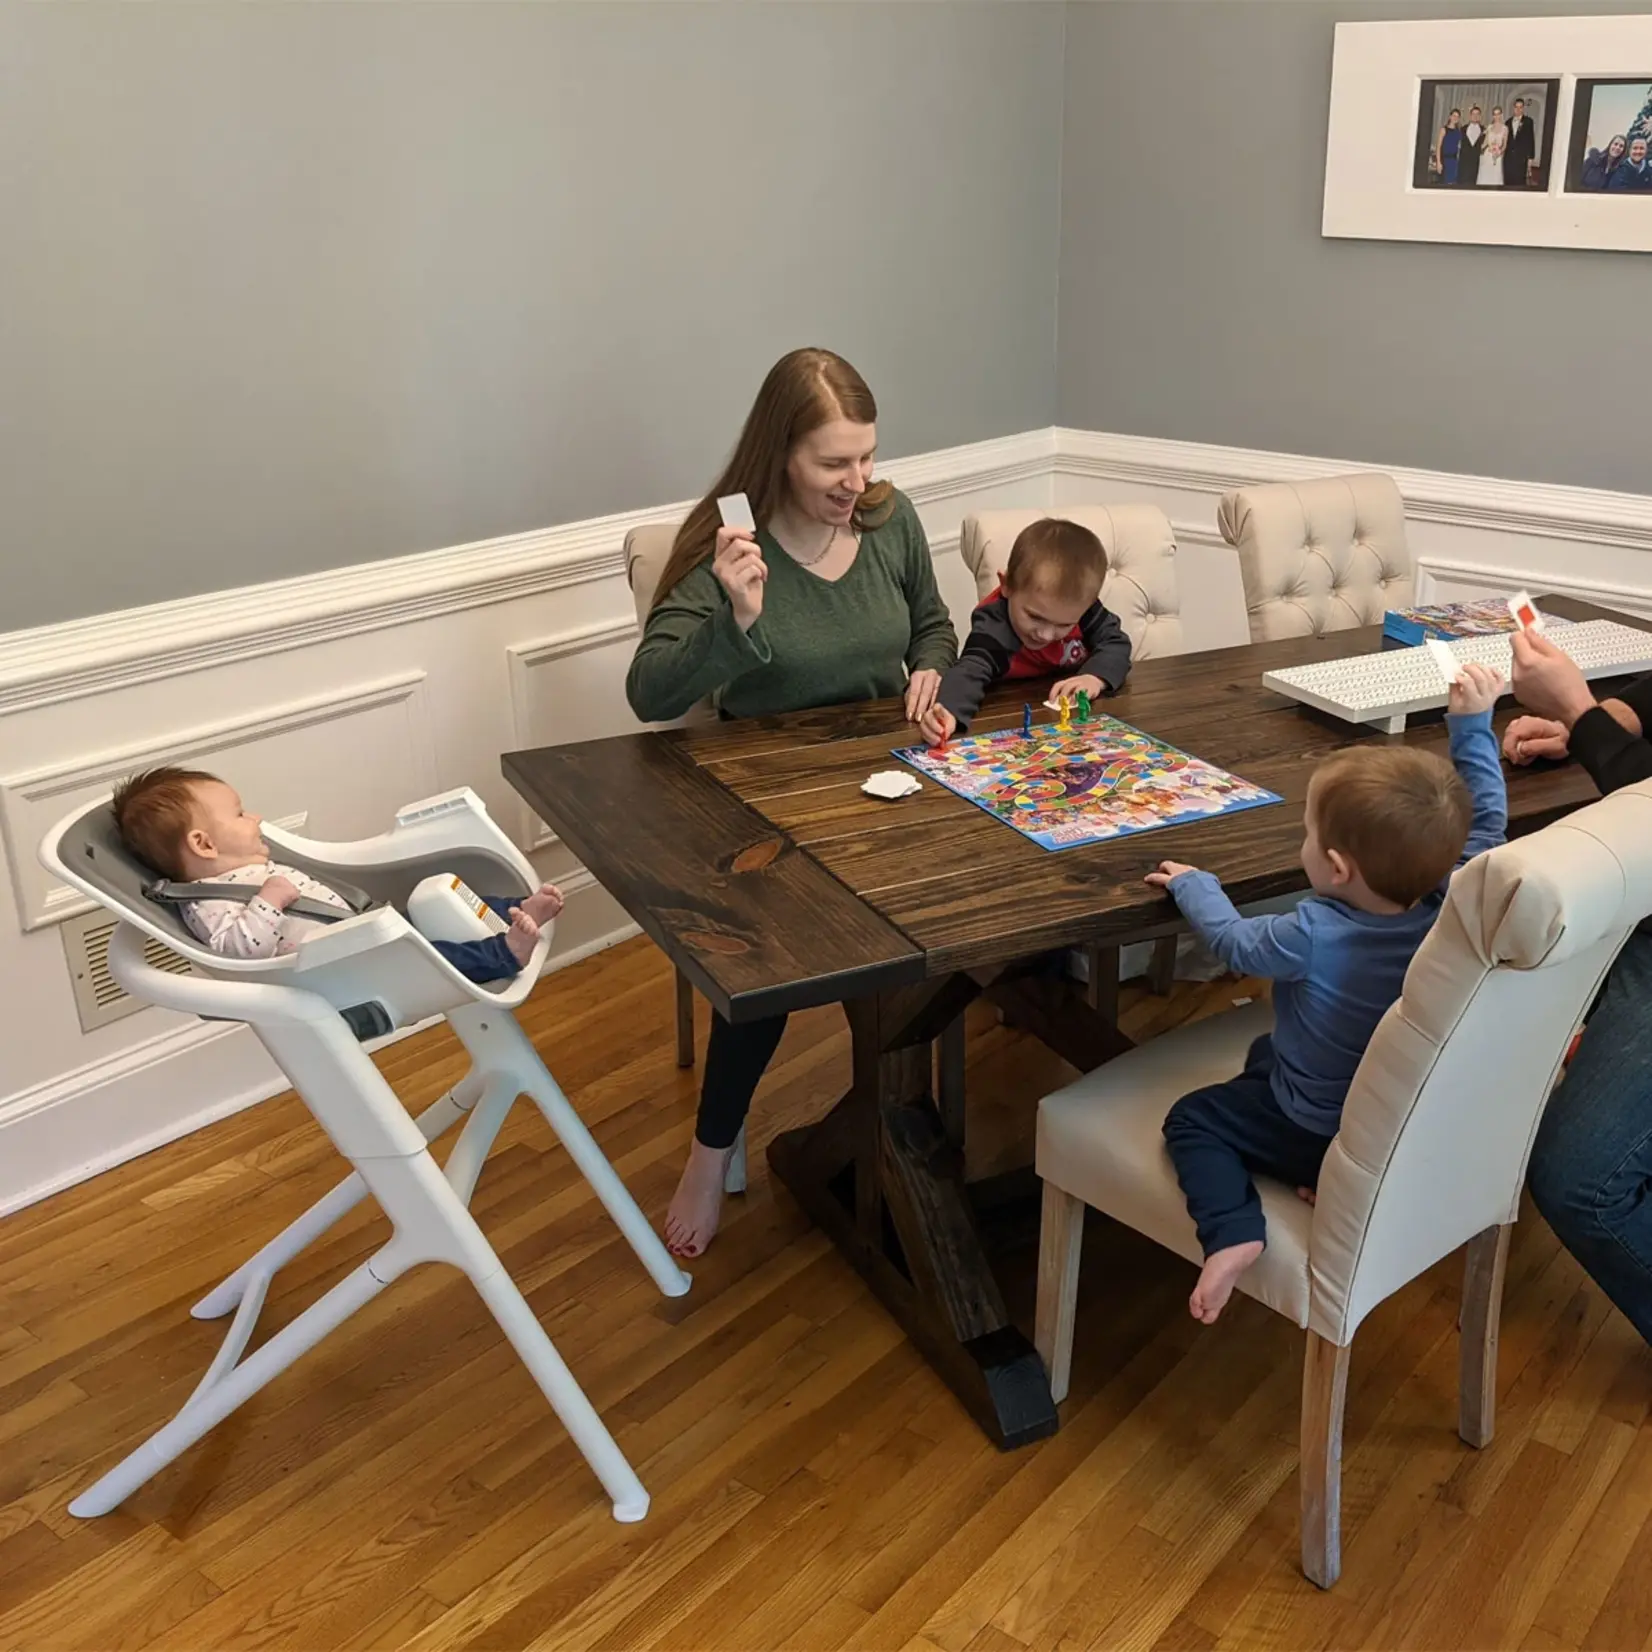 4Moms 4MOMS CONNECT HIGH CHAIR